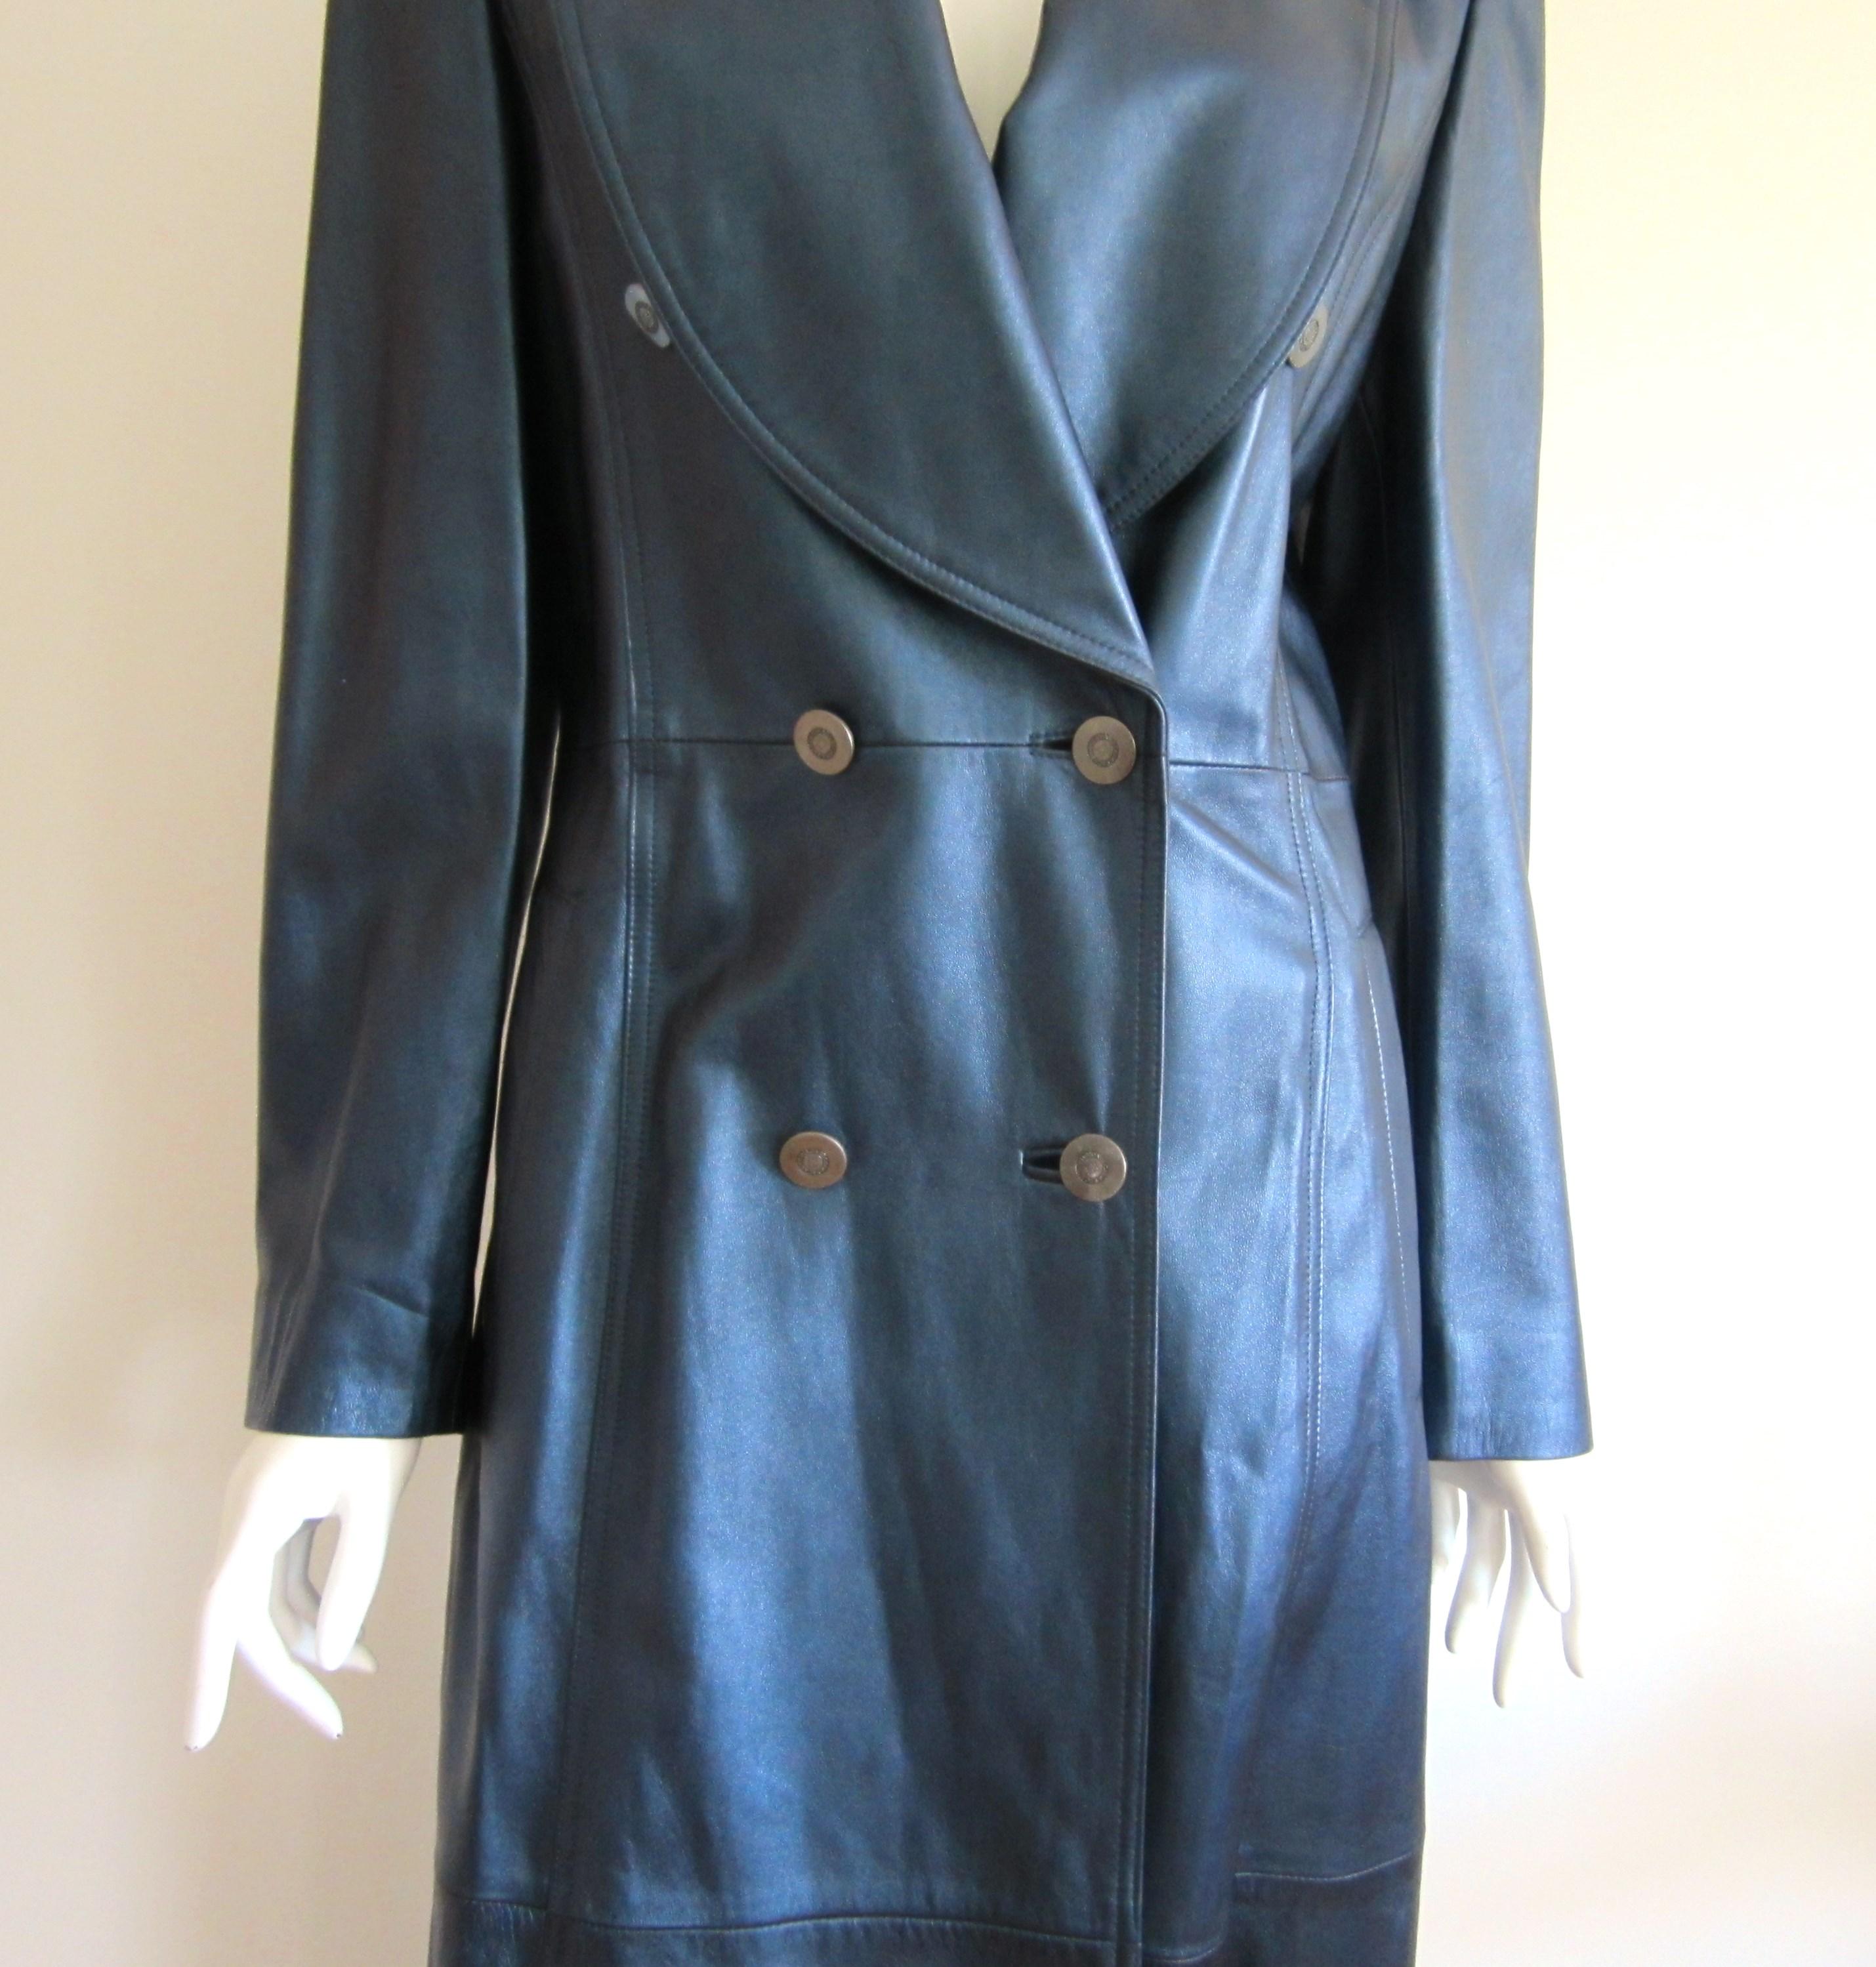 Black Escada Metallic Blue Leather Trench Overcoat Size 38 1990s New With Tags Coat  For Sale